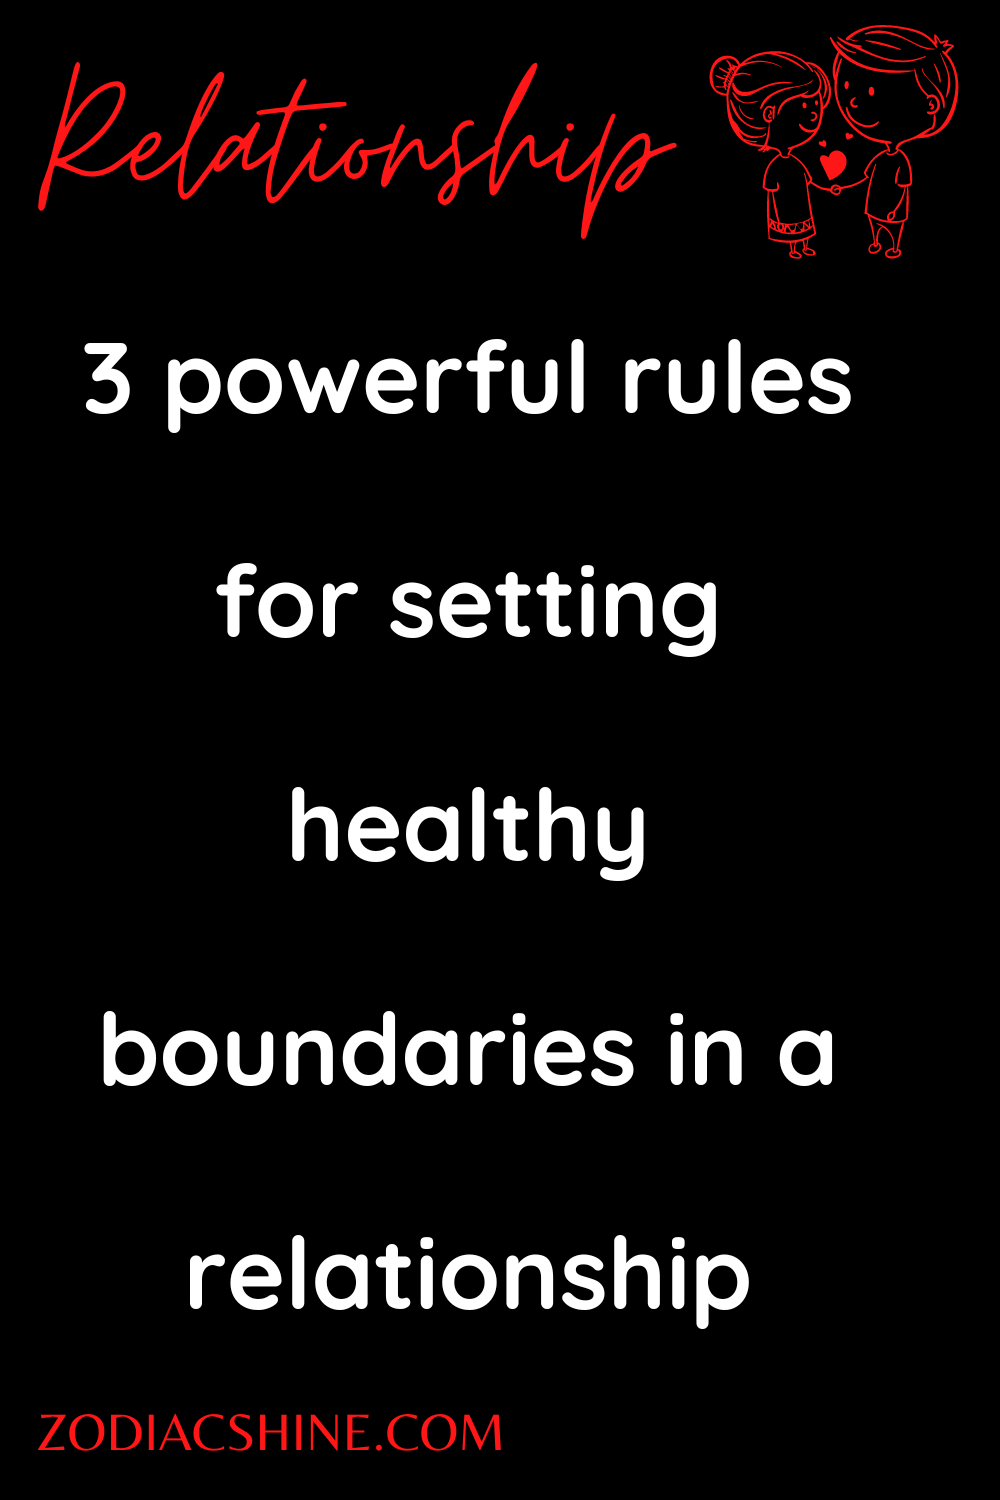 3 powerful rules for setting healthy boundaries in a relationship